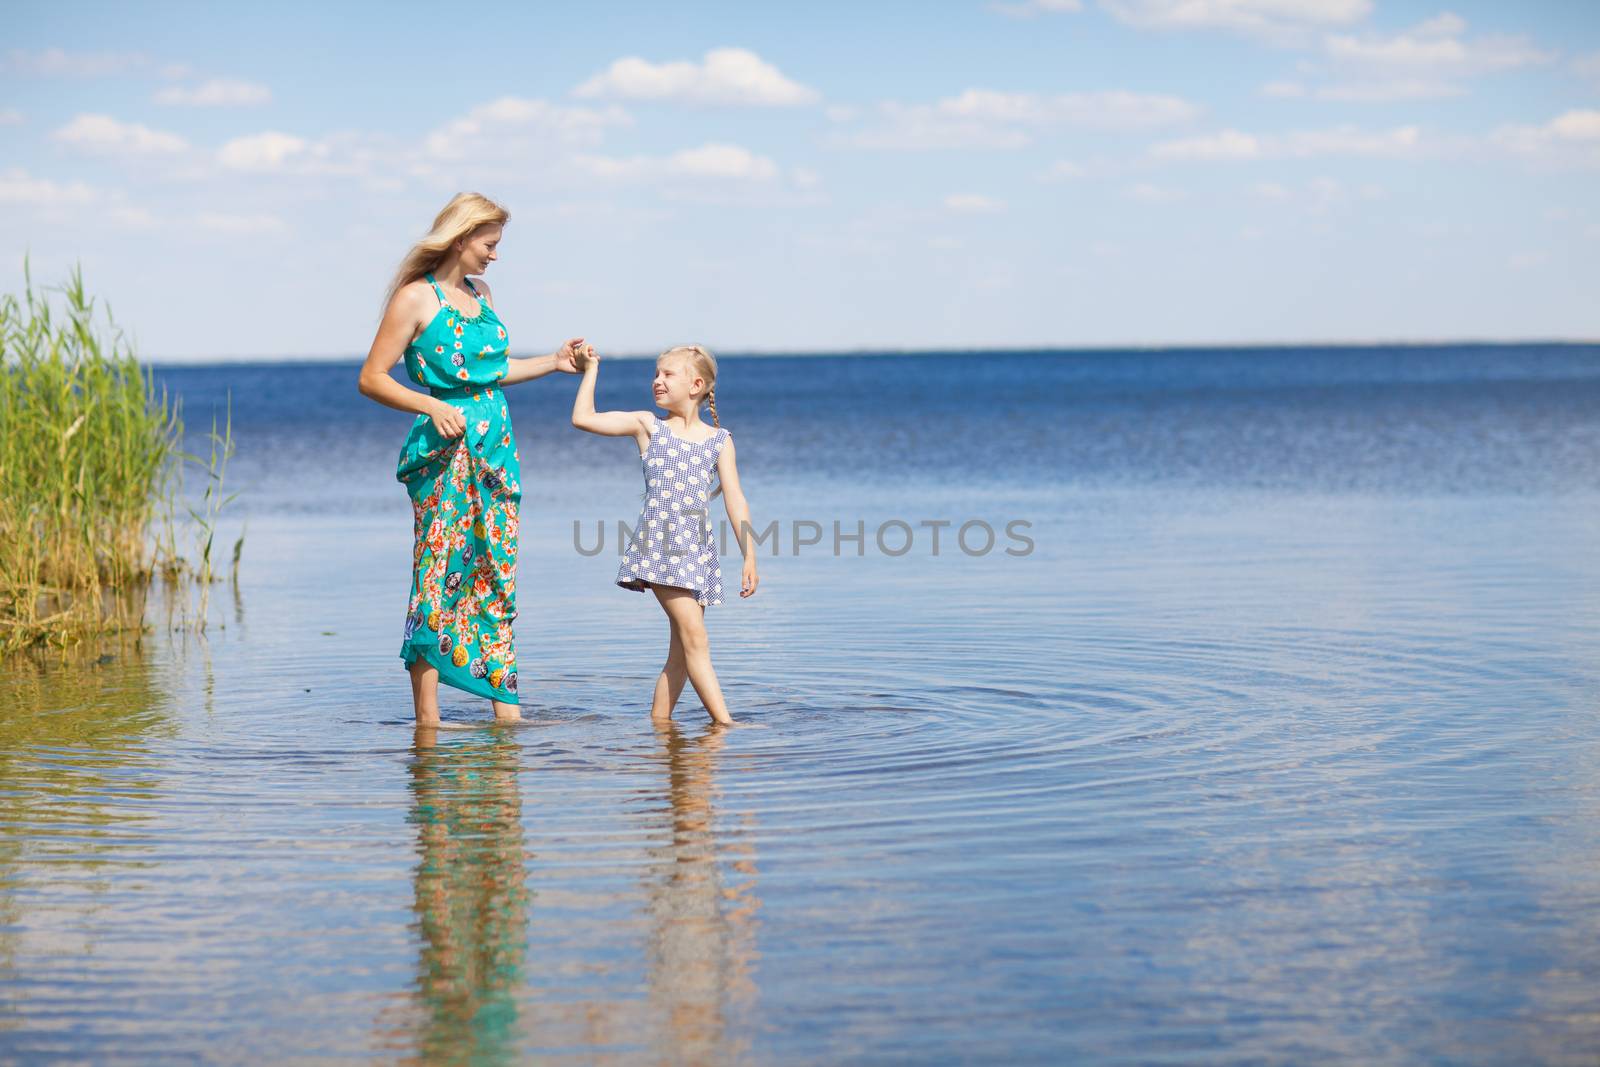 mom and daughter by vsurkov